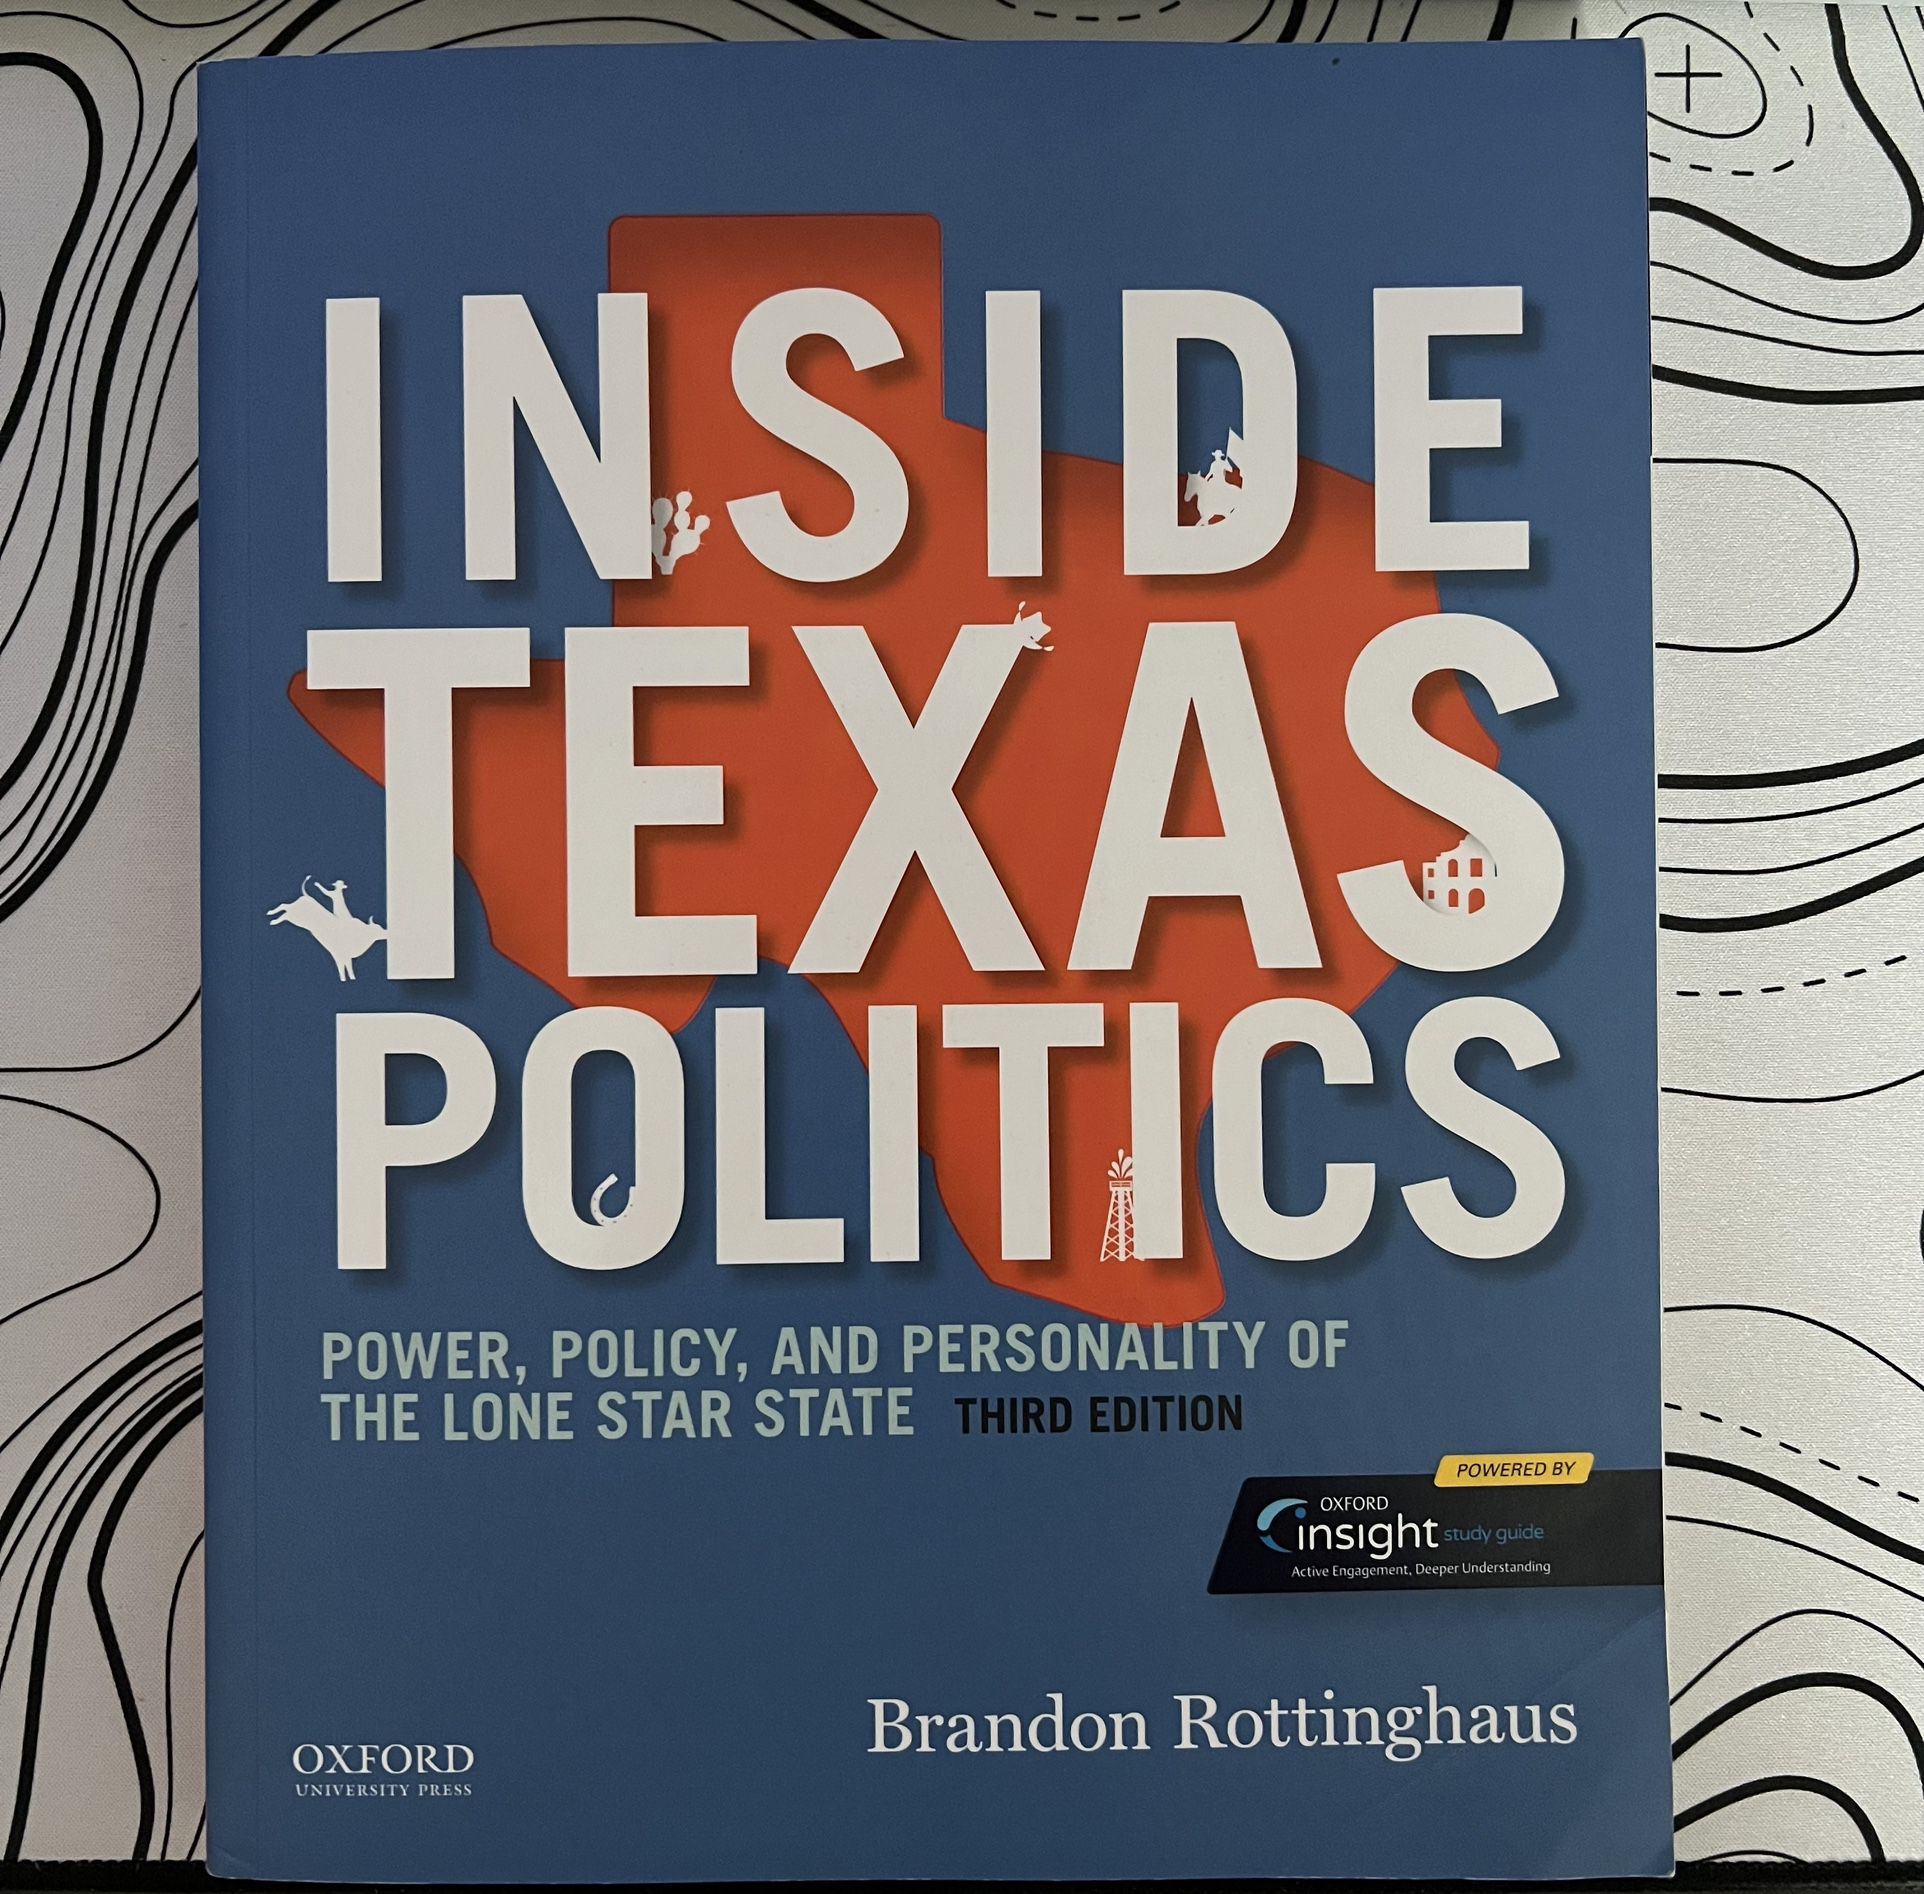 Inside Texas Politics: Power, Policy, and Personality of the Lone Star State 3rd Edition